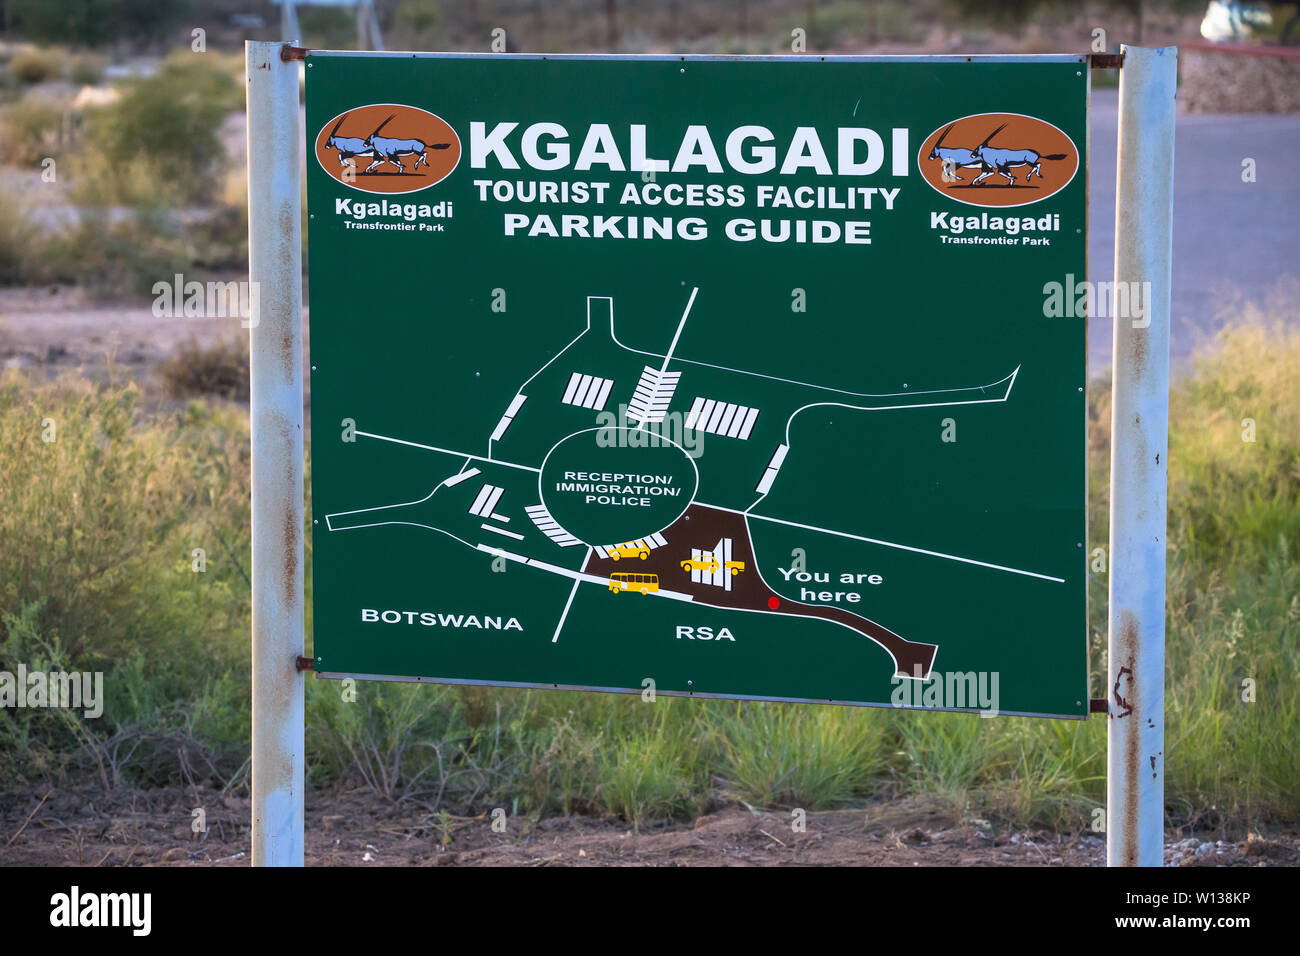 tourist information sign board and map diagram of the tourist access facility and parking guide at Kgalagadi Transfrontier park in South Africa Stock Photo